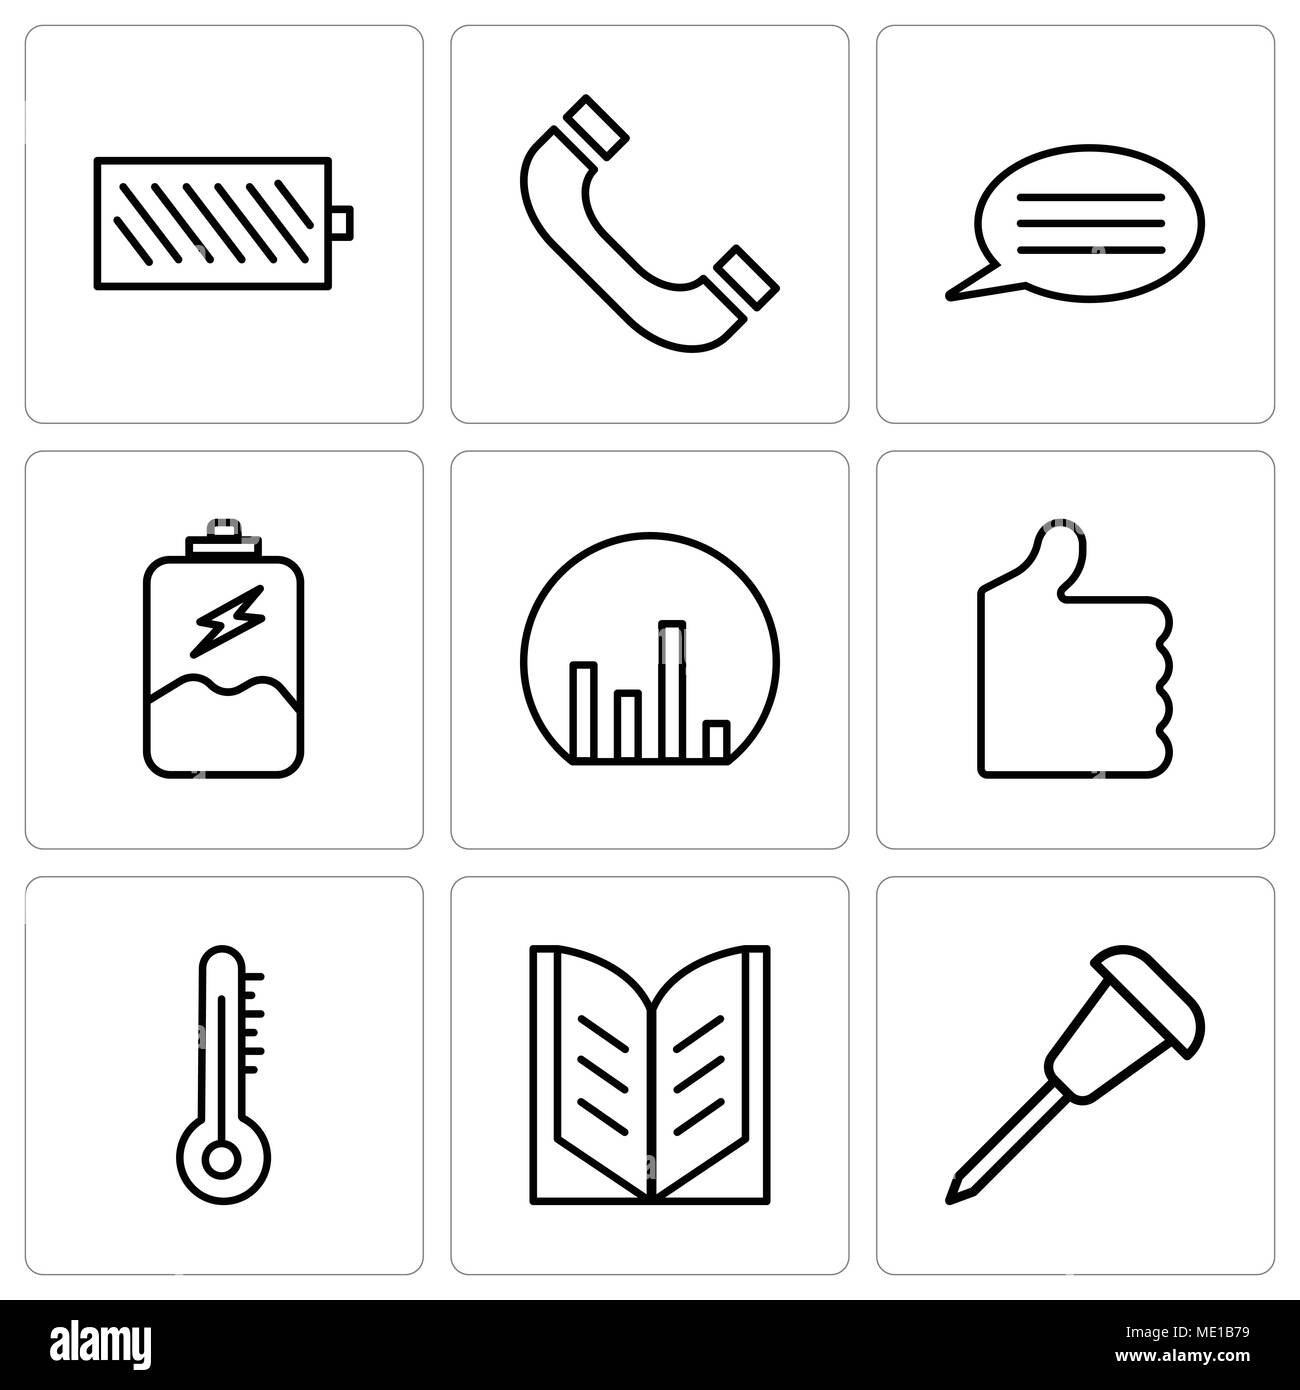 Set Of 9 simple editable icons such as Pushpin, Open book, Mercury thermometer, Thumb up, Bar chart, Battery charging, Speech bubble with text, Headph Stock Vector